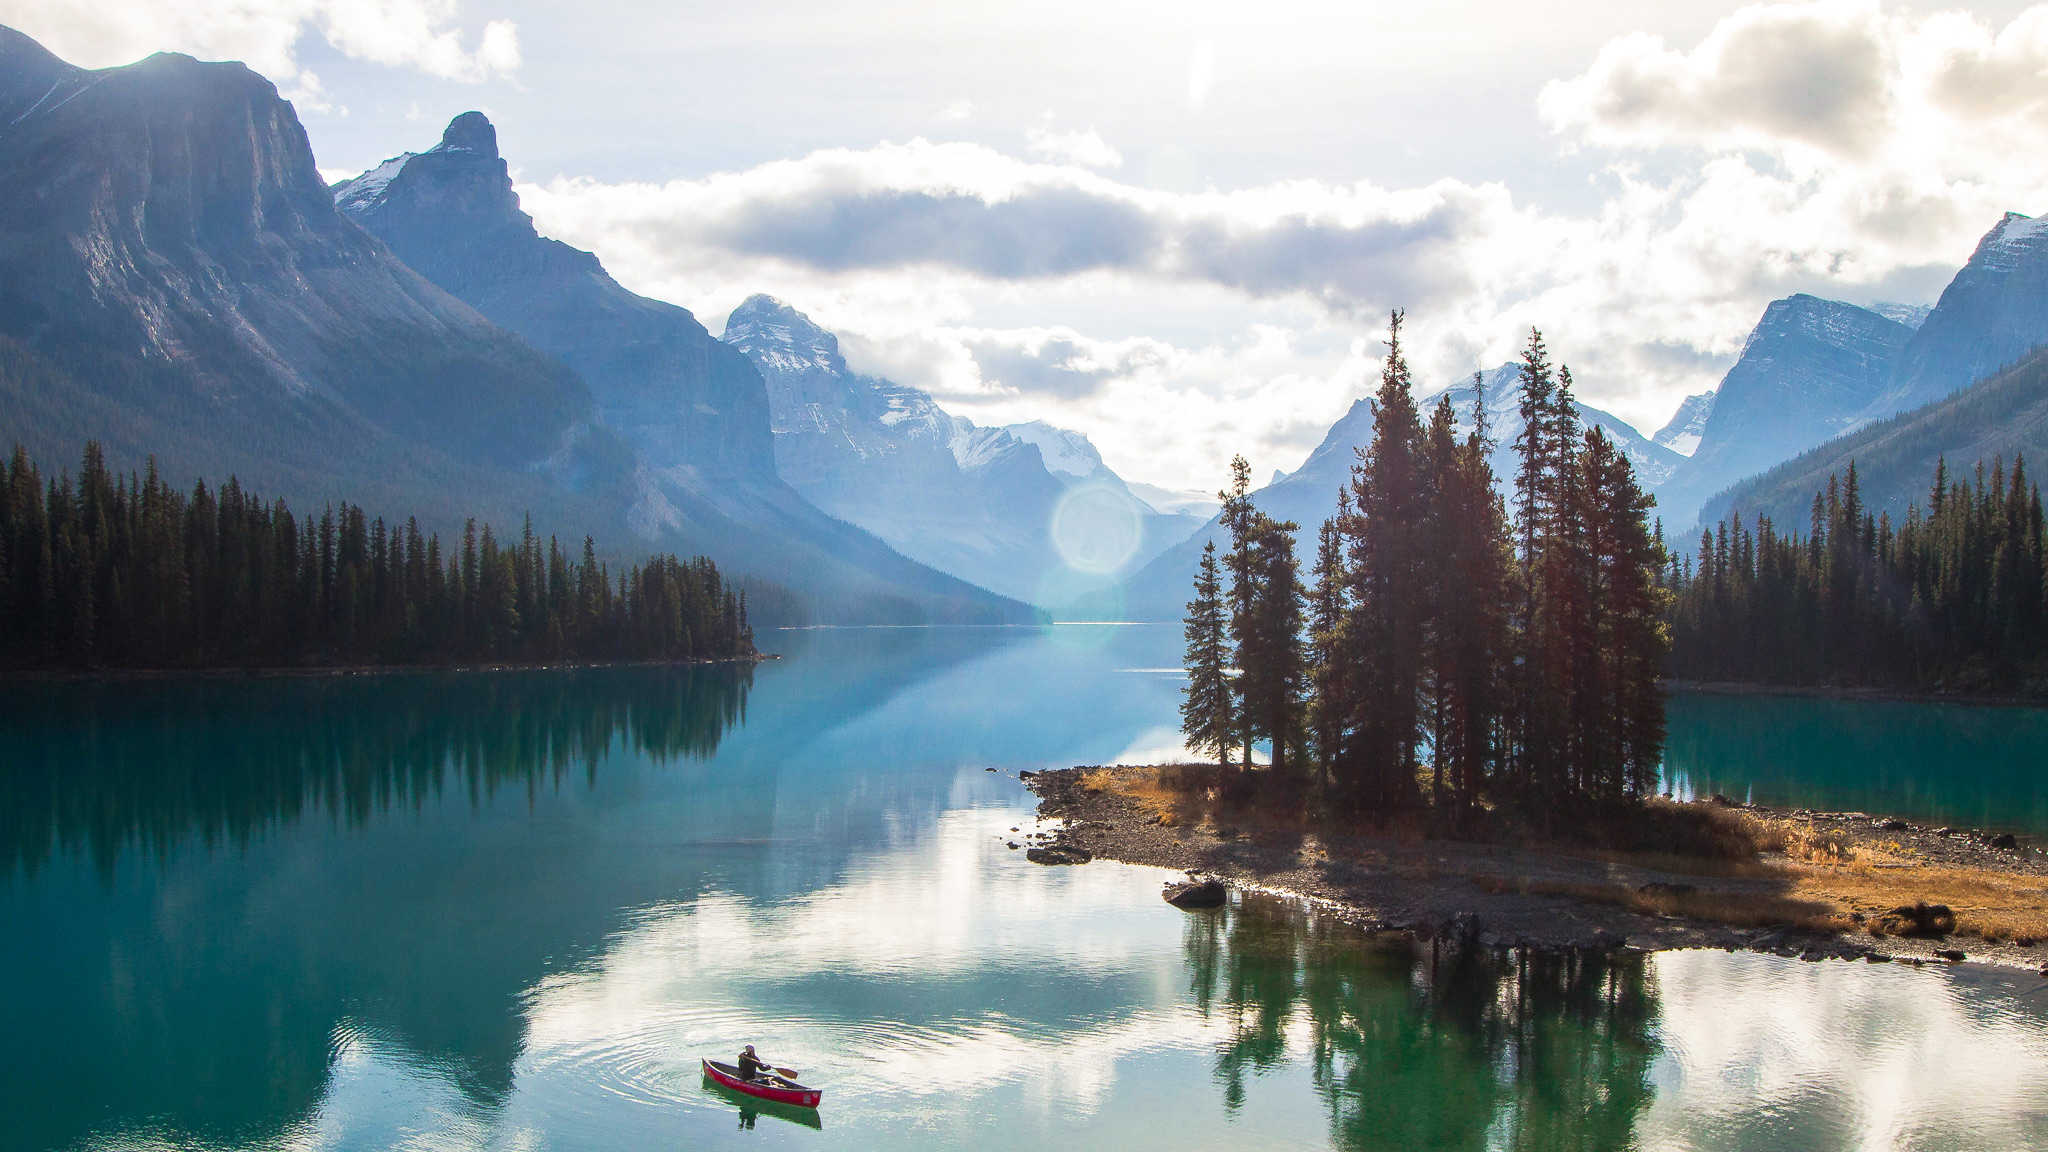 4 tips that will help you plan a trip to Canada or Alaska in 2020